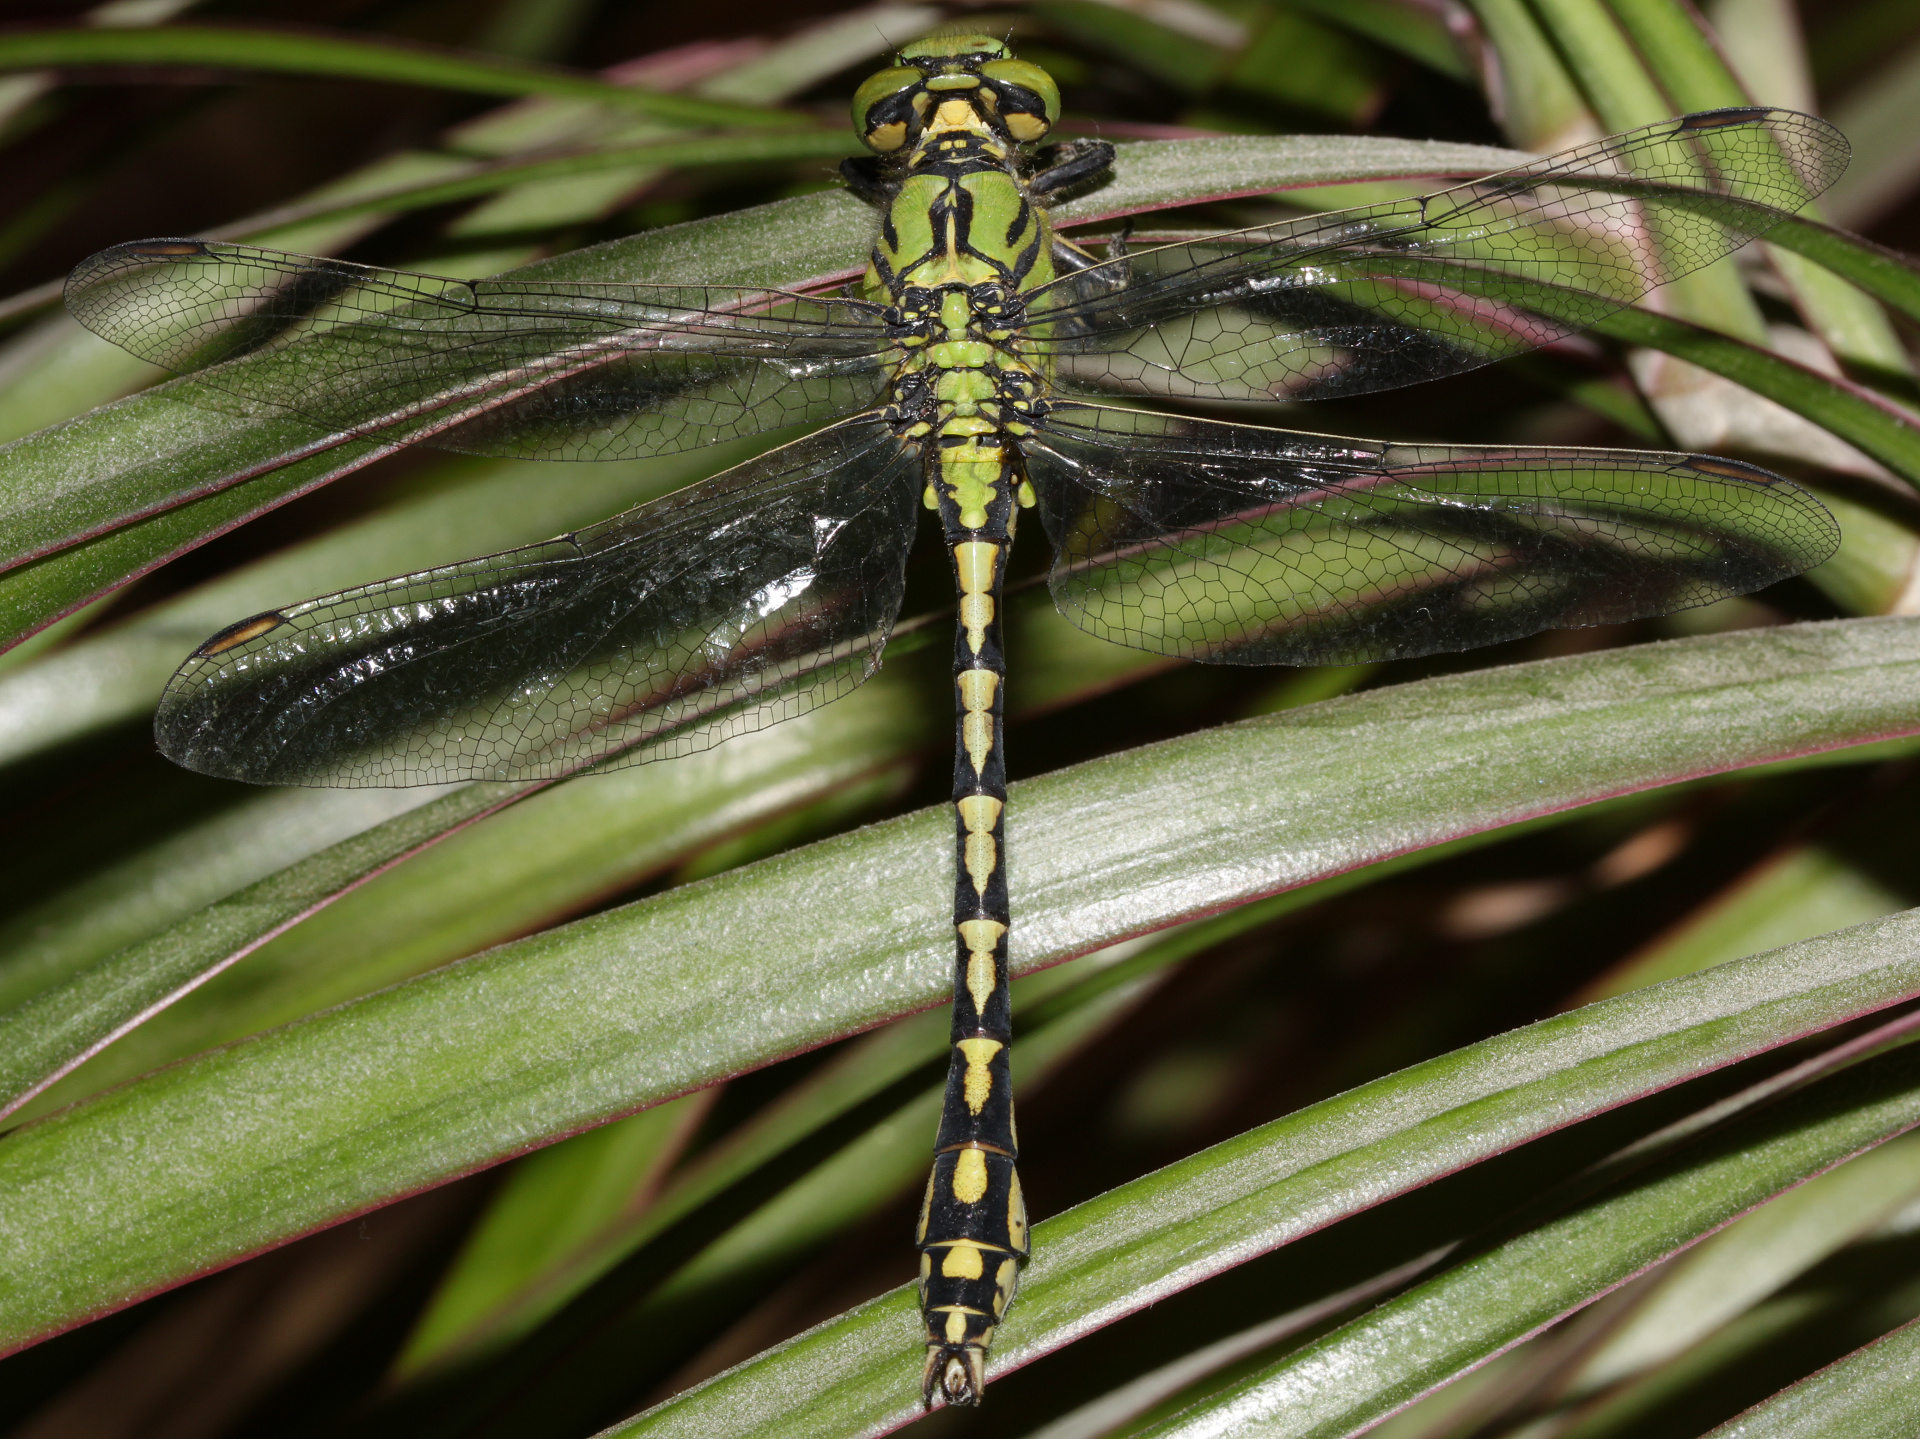 Ophiogomphus cecilia (Animals » Insects » Dragonflies)